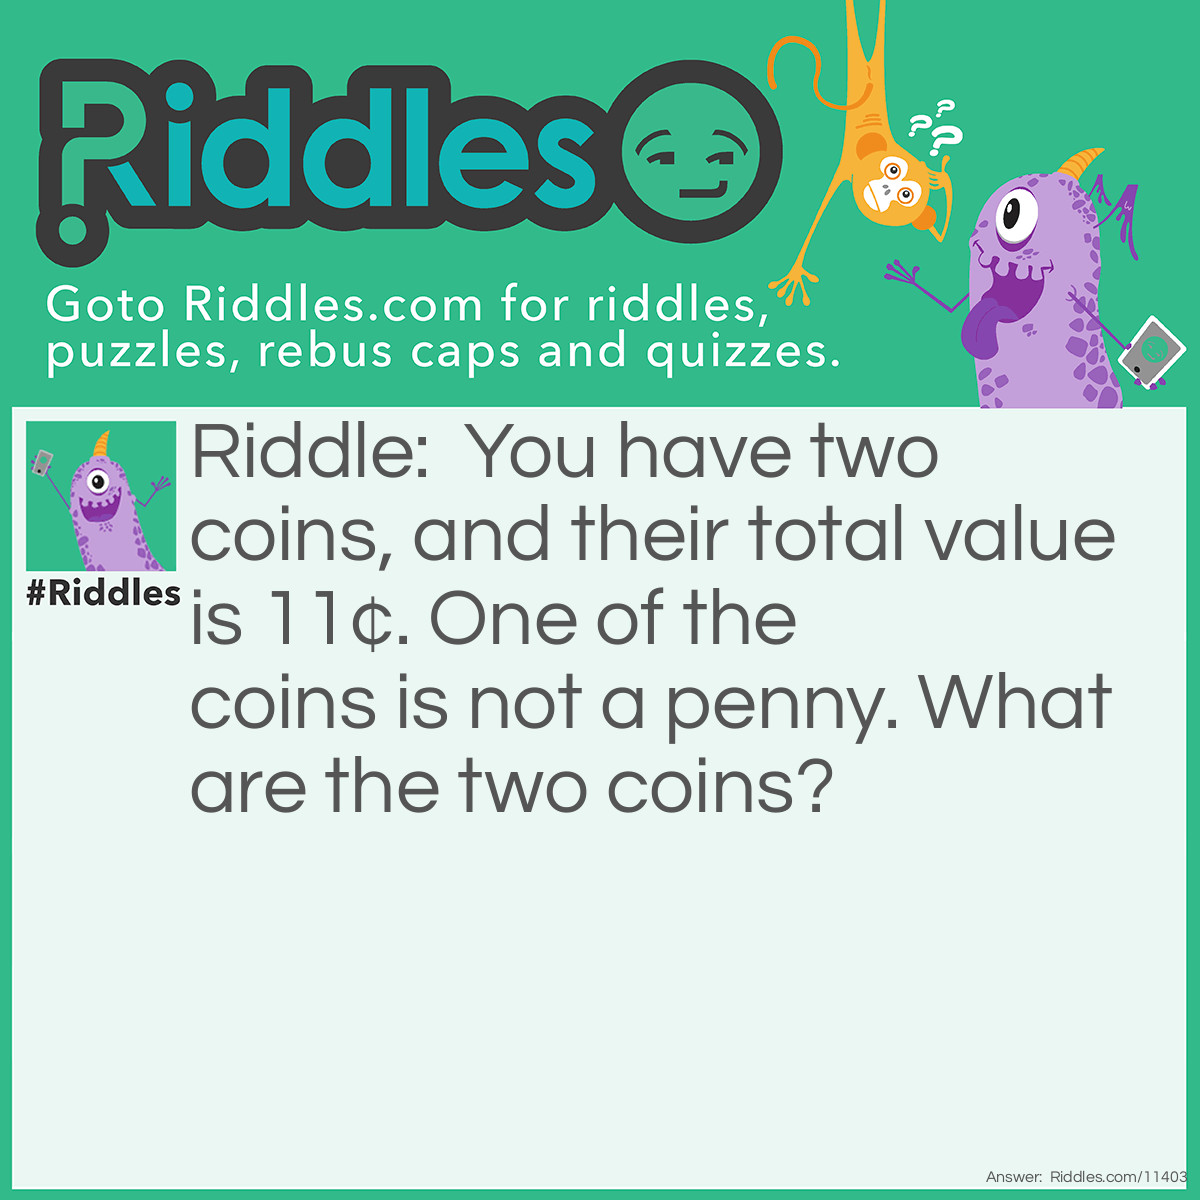 Riddle: You have two coins, and their total value is 11¢. One of the coins is not a penny. What are the two coins? Answer: The two coins are a dime and a penny. I said "ONE of the coins is not a penny"; if one of the coins is not a penny, then the other coin IS a penny. The coin that is not a penny has to be a dime because the total value should be 11¢.